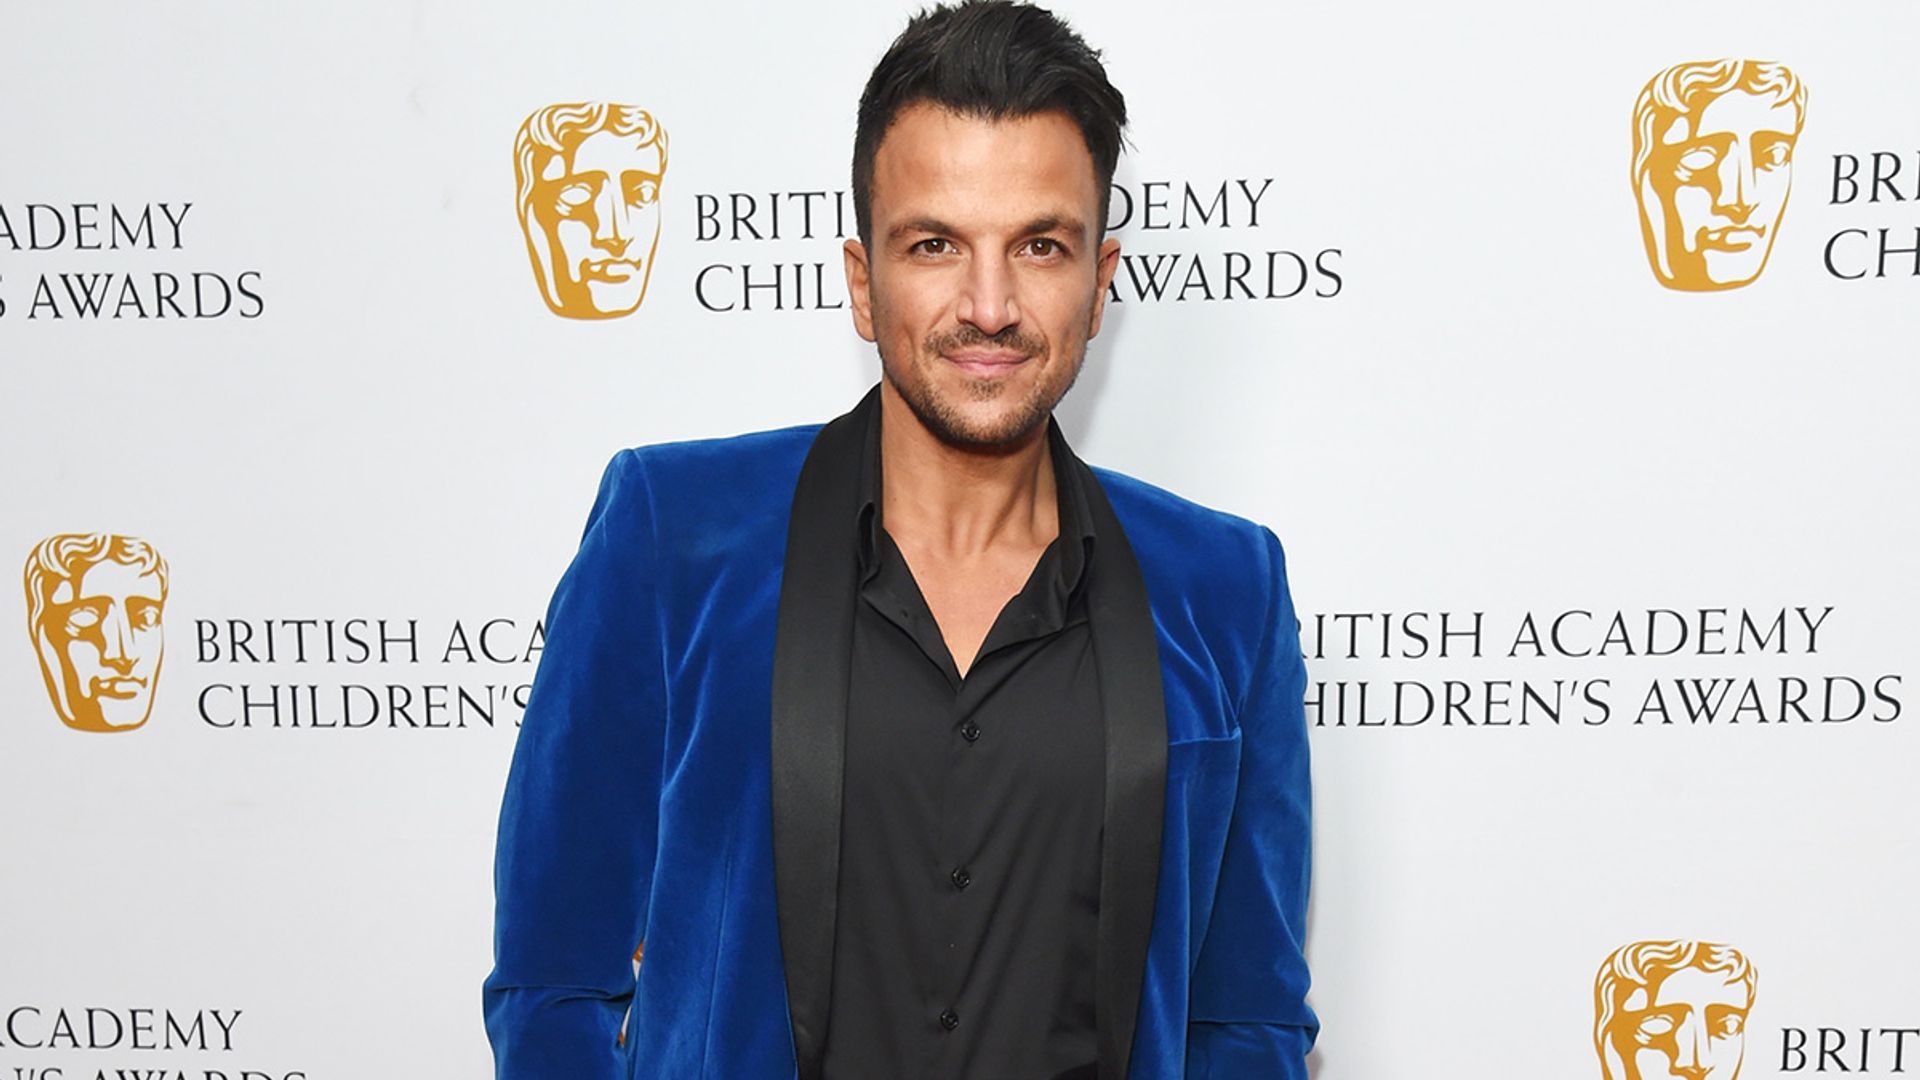 Peter Andre shares emotional tribute alongside photos of rarely-seen family member